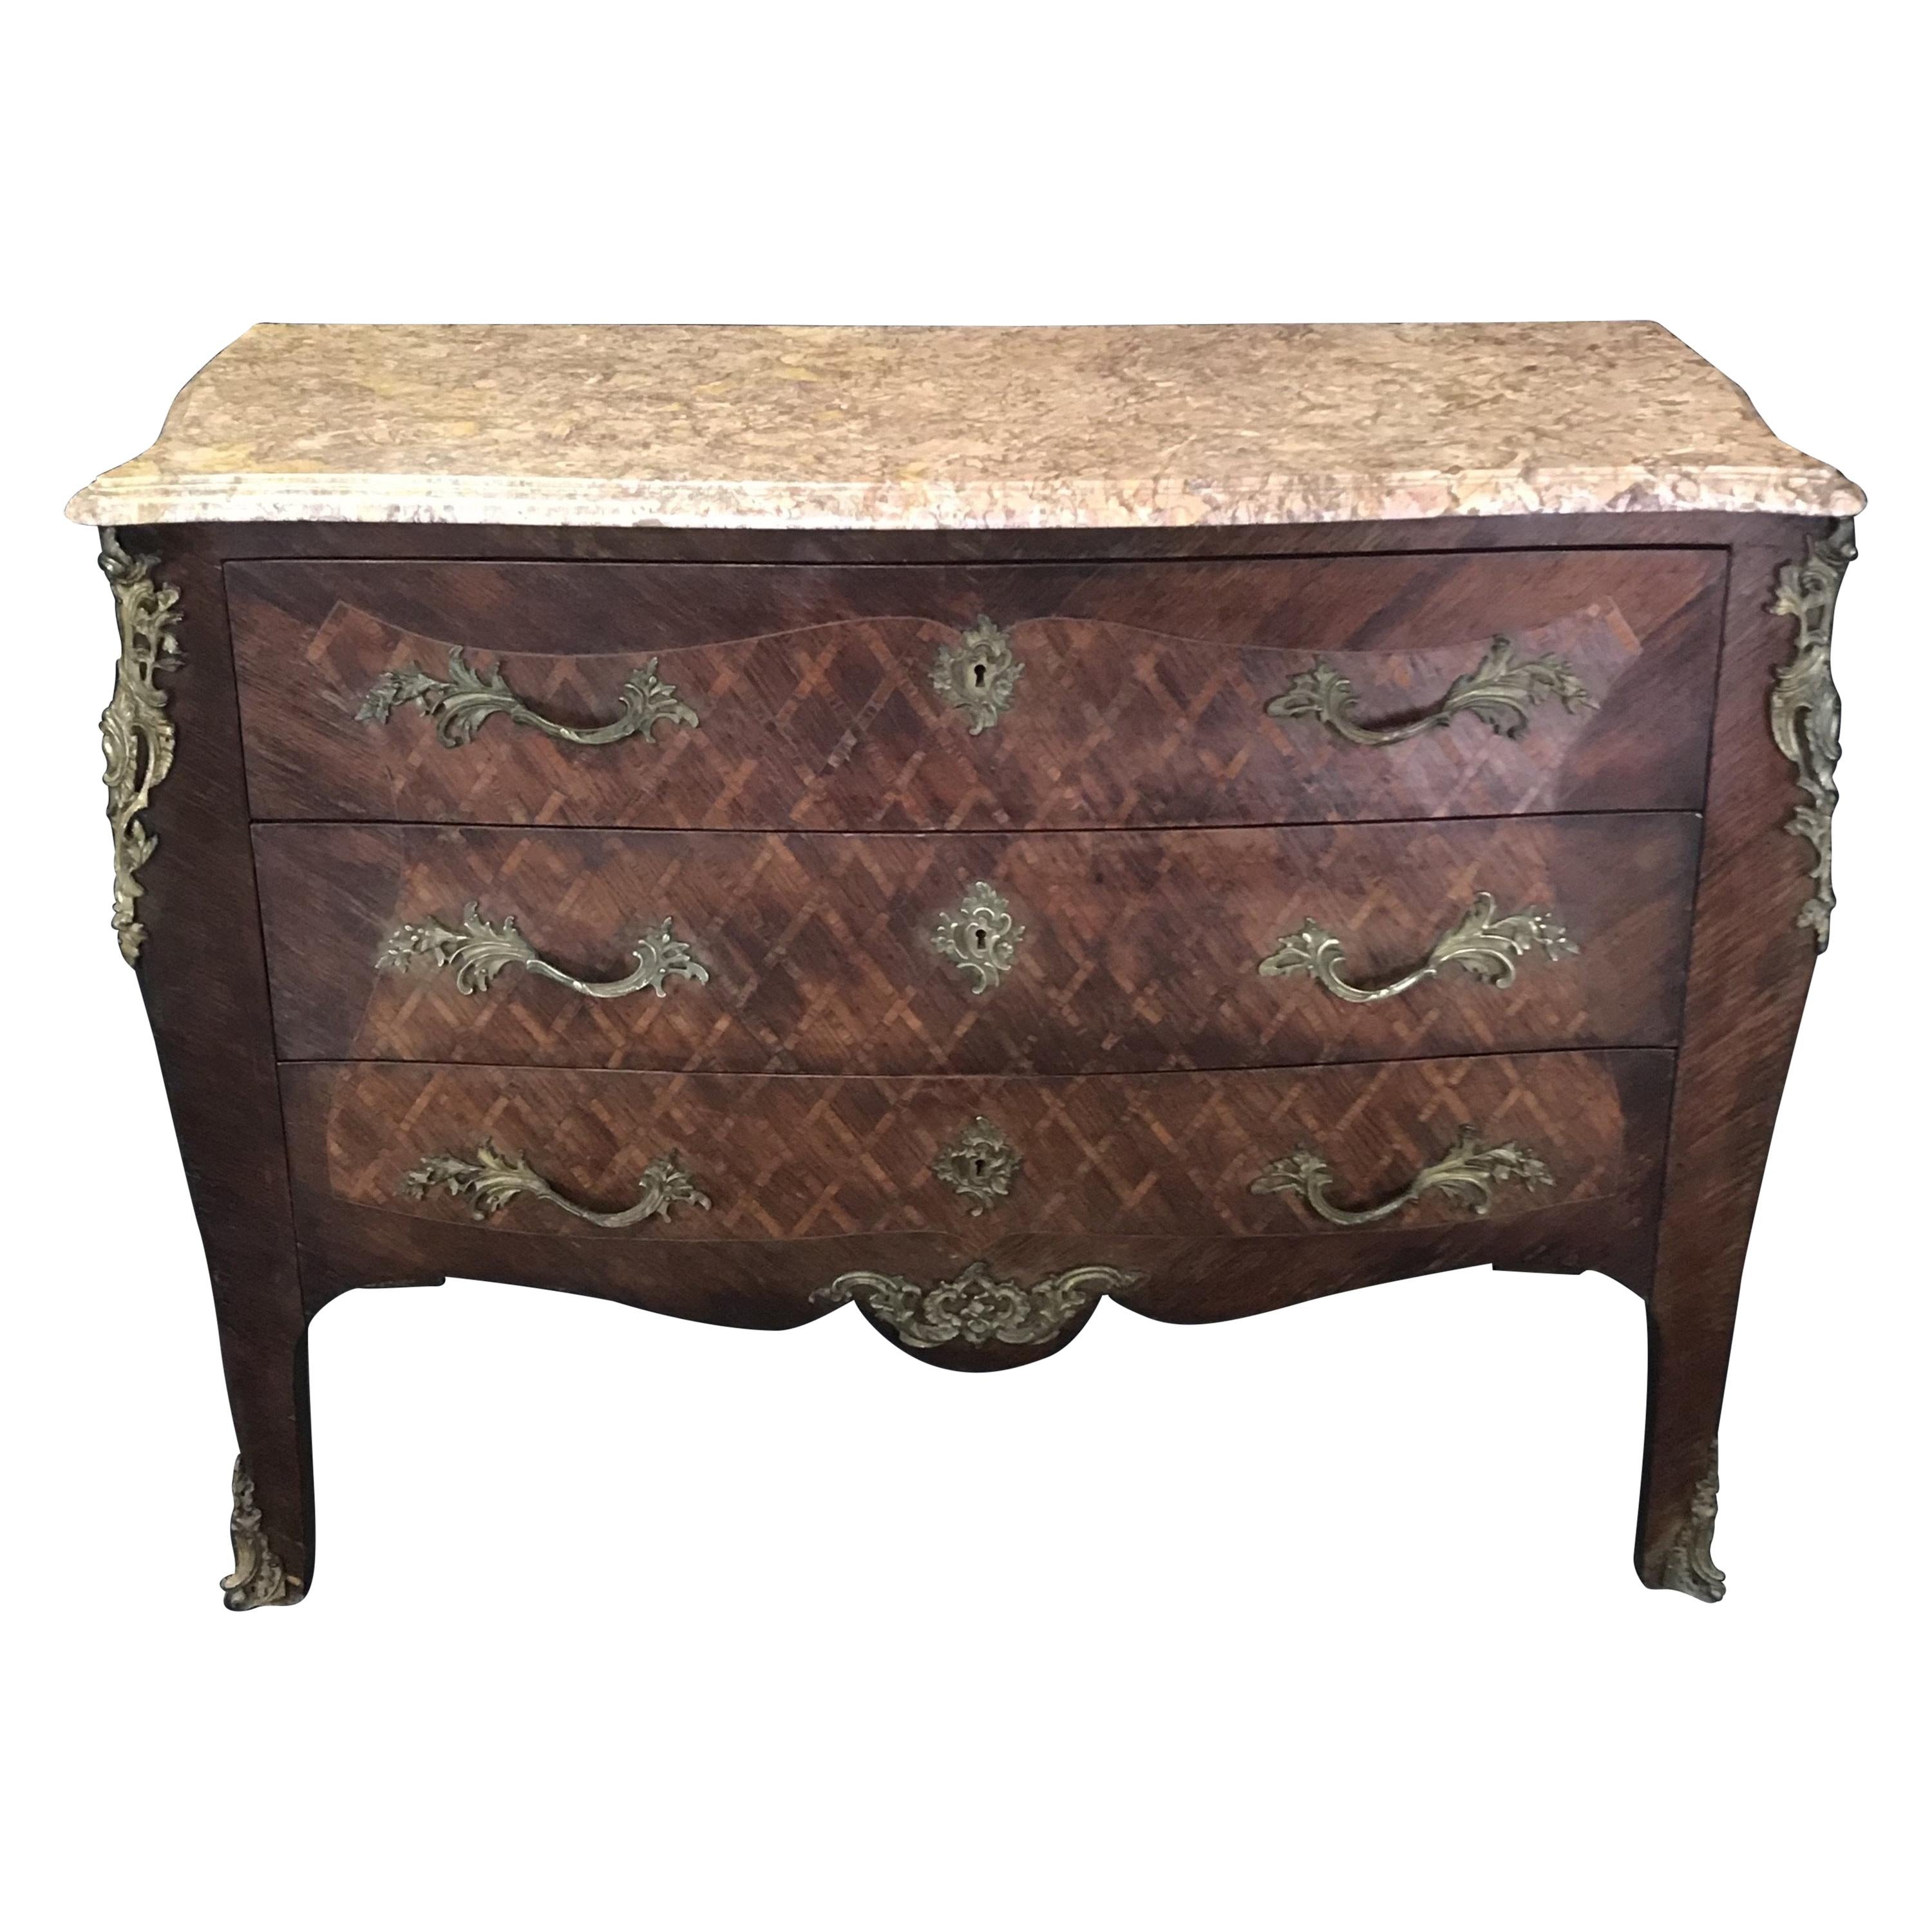 Antique French Louis XV Diamond Marquetry Commode Chest of Drawers